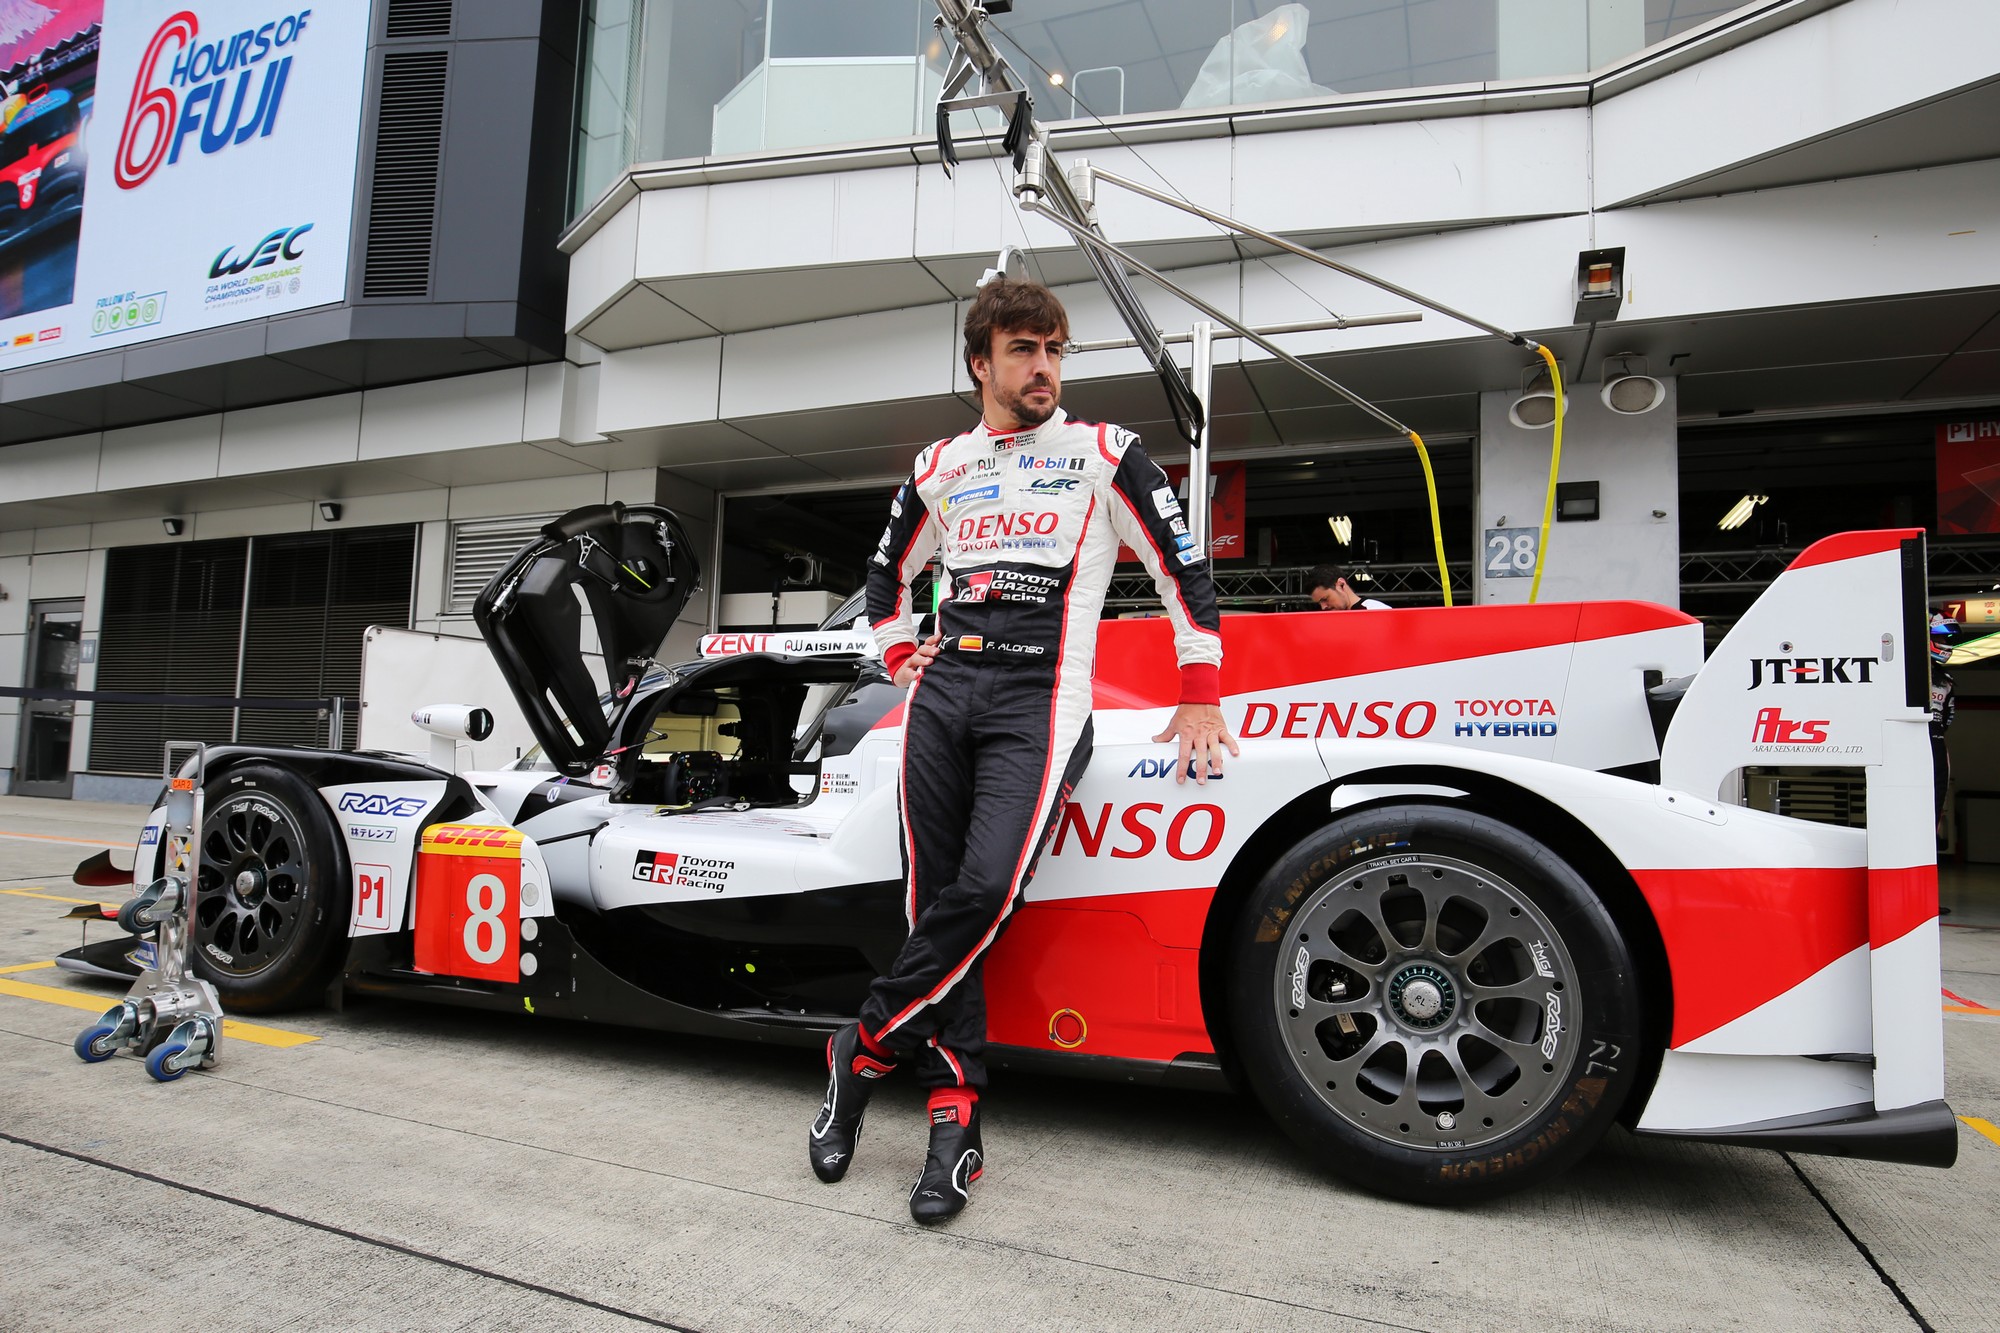 Alonso and Toyota cannot lose the WEC. God (FIA) has given them  a huge performance advantage